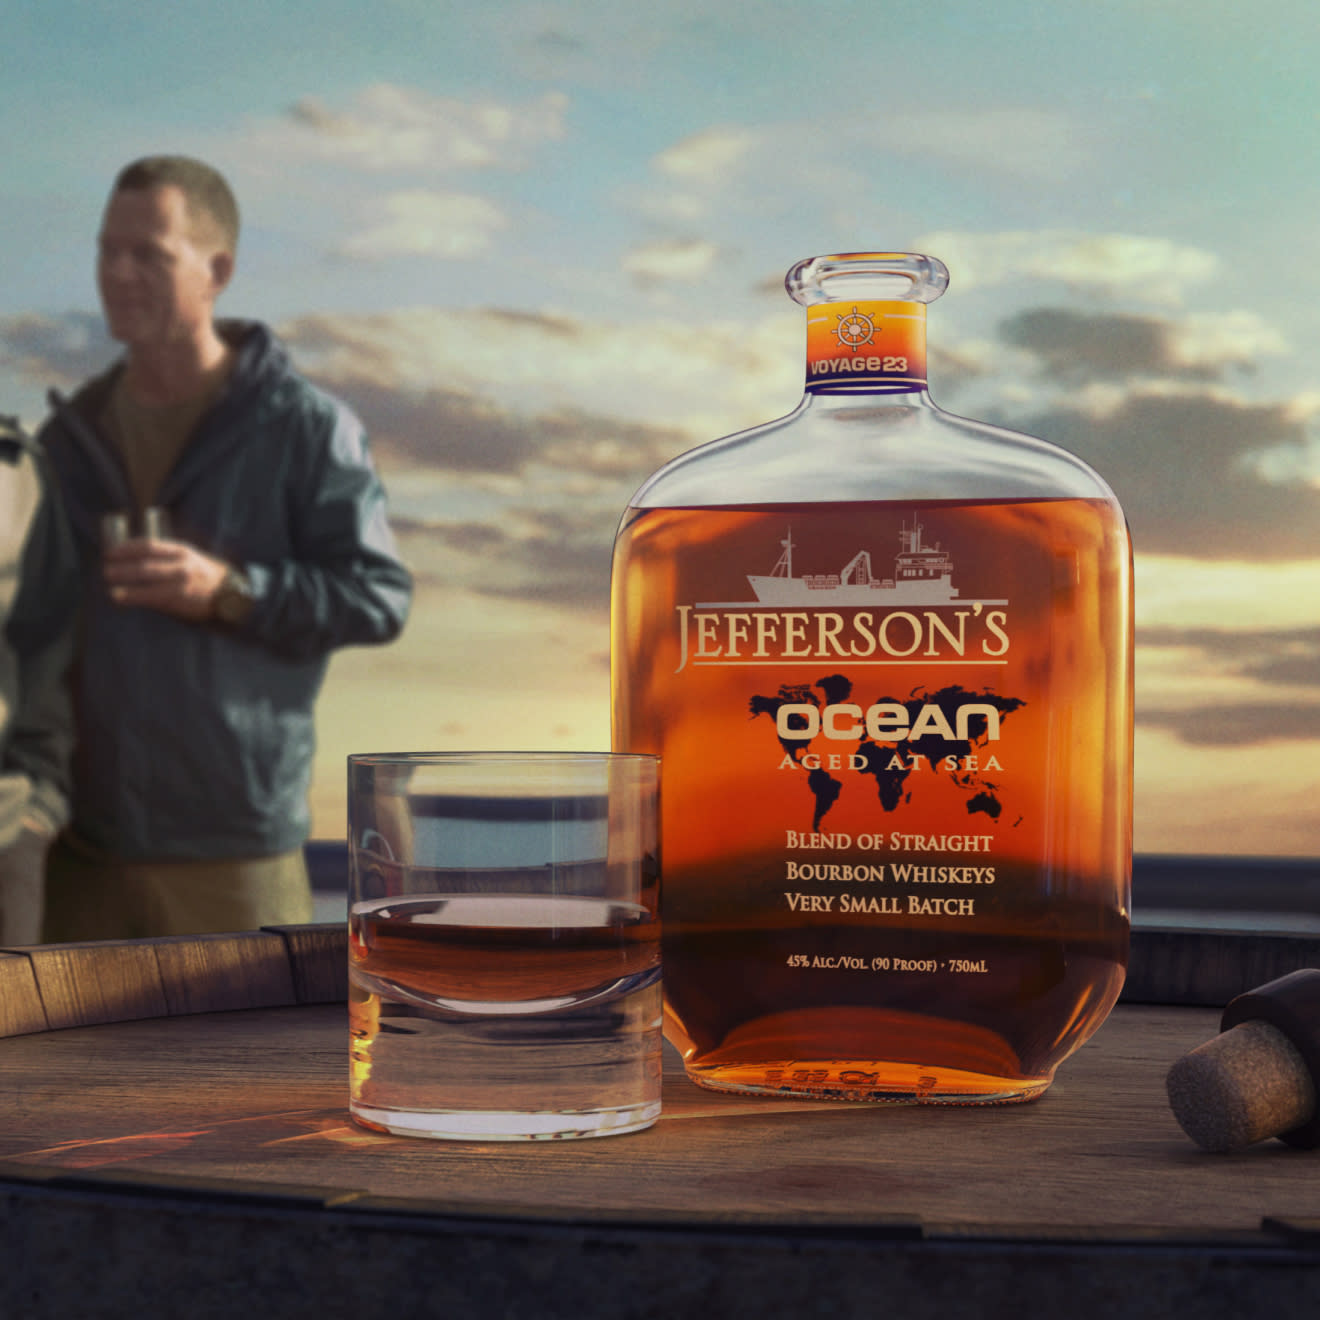 Jefferson’s Ocean promo of people at the beach enjoying a glass of bourbon with a bottle in the foreground